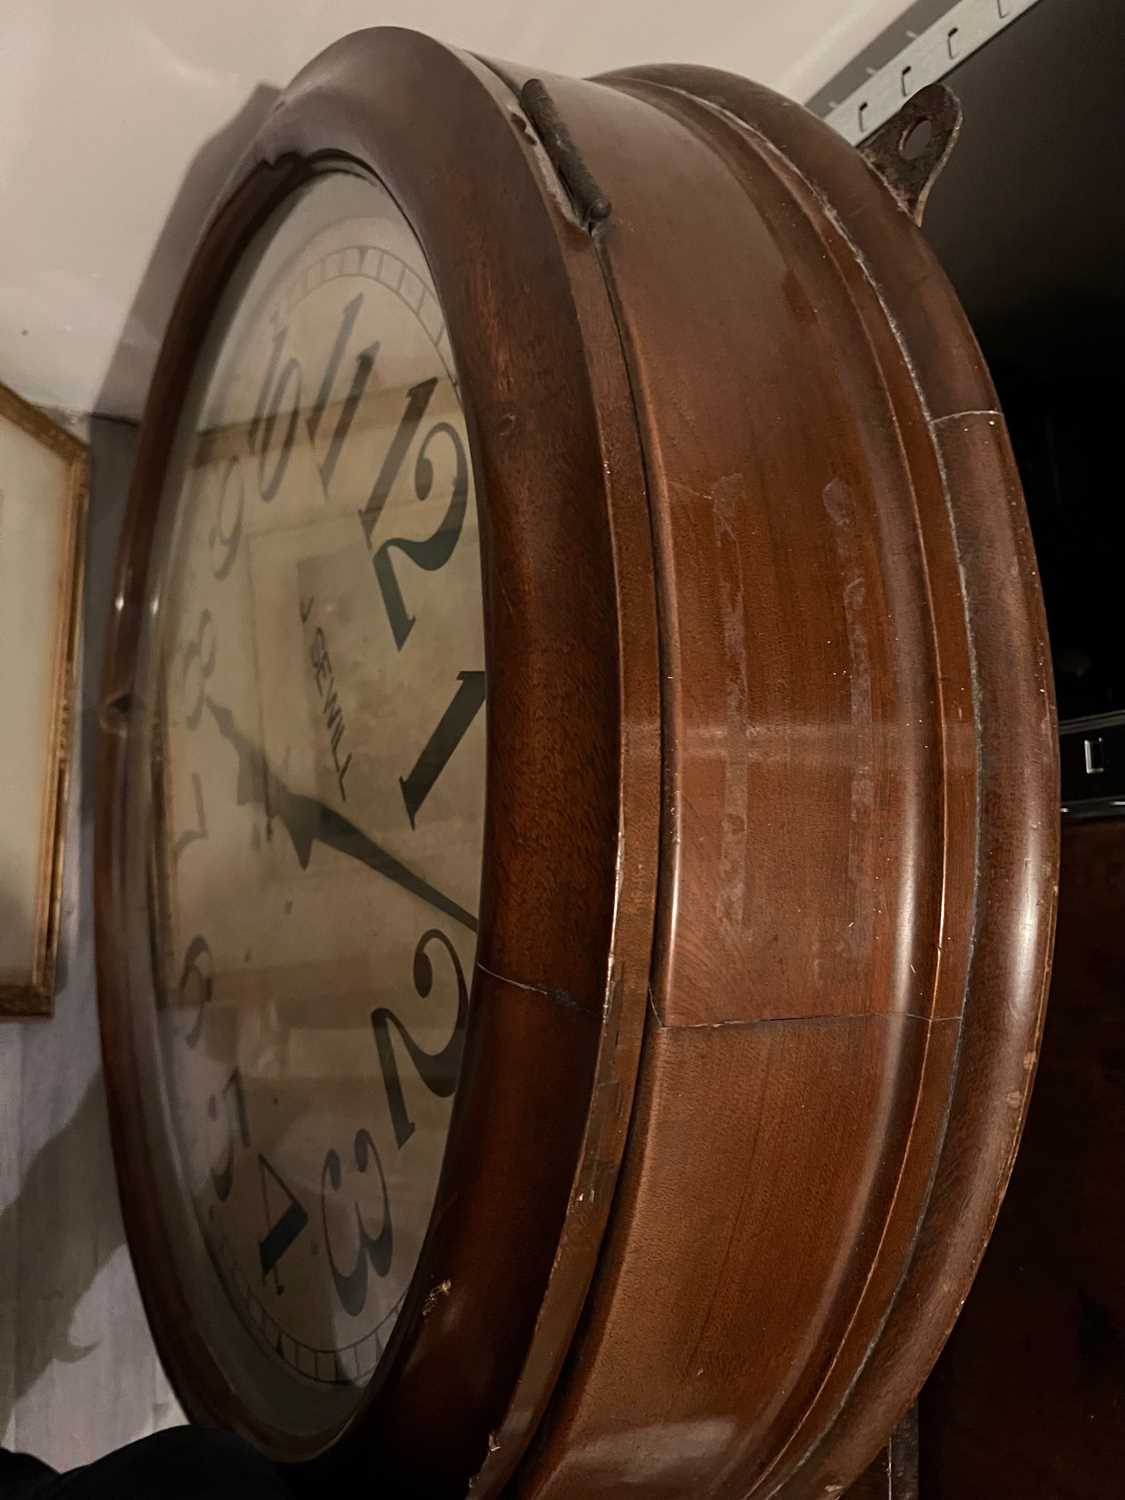 A LARGE LATE 19TH / EARLY 20TH CENTURY ENGLISH FUSEE WALL CLOCK - Image 6 of 11